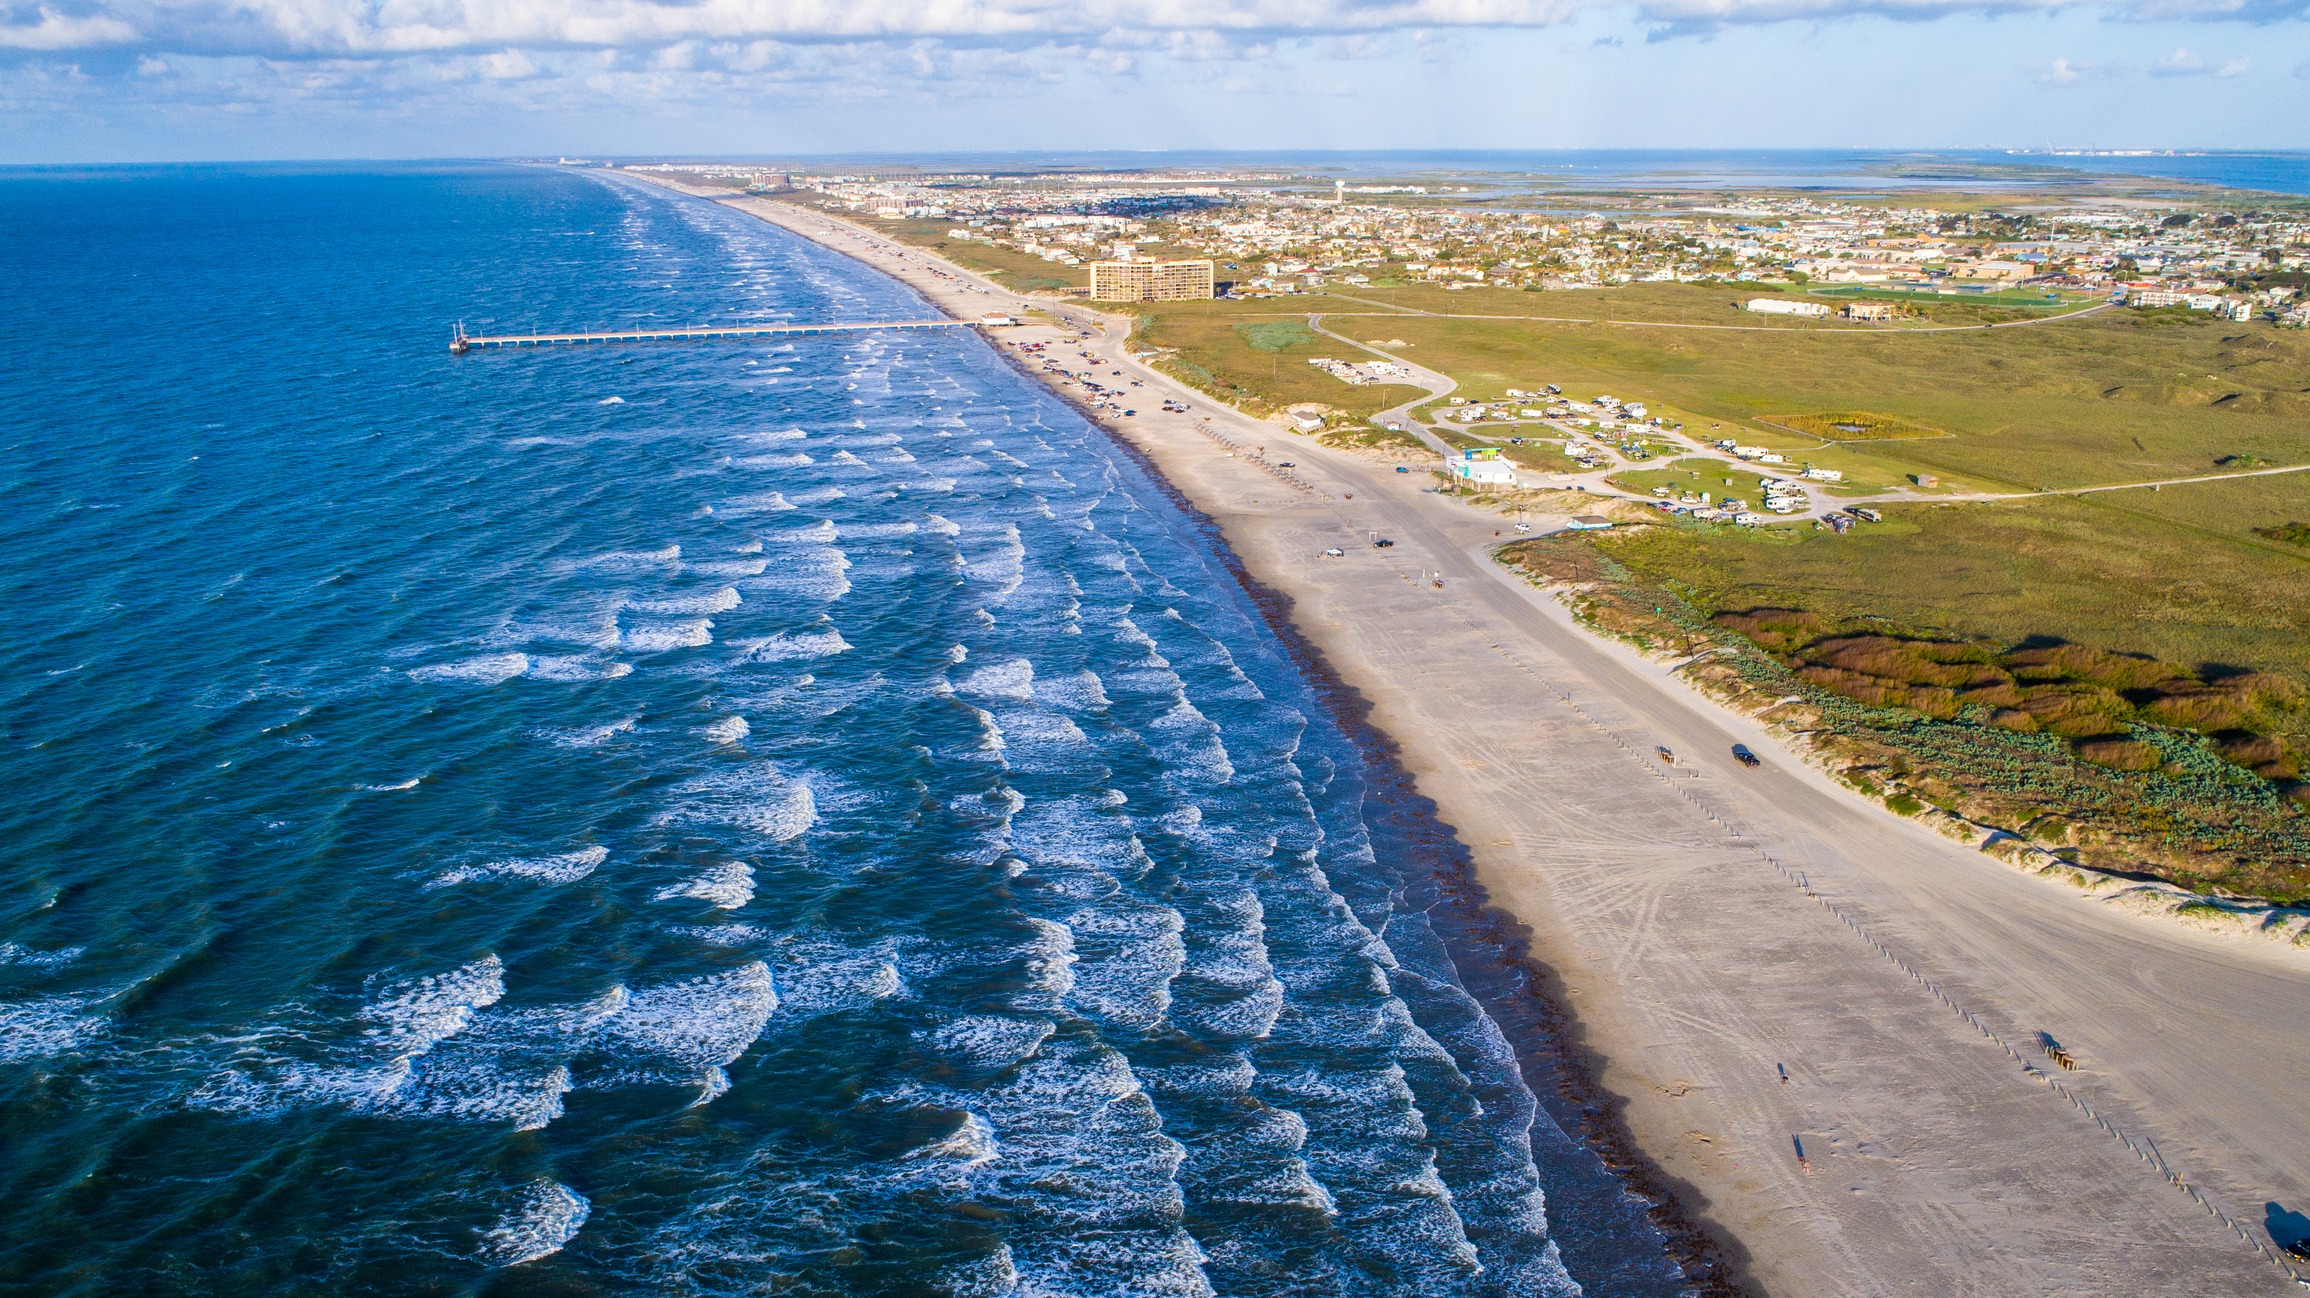 breaking waves fill the left portion of this drone image capturing Padre Island from above, the right side shows a long stretch of sandy beach with buildings in the distance.